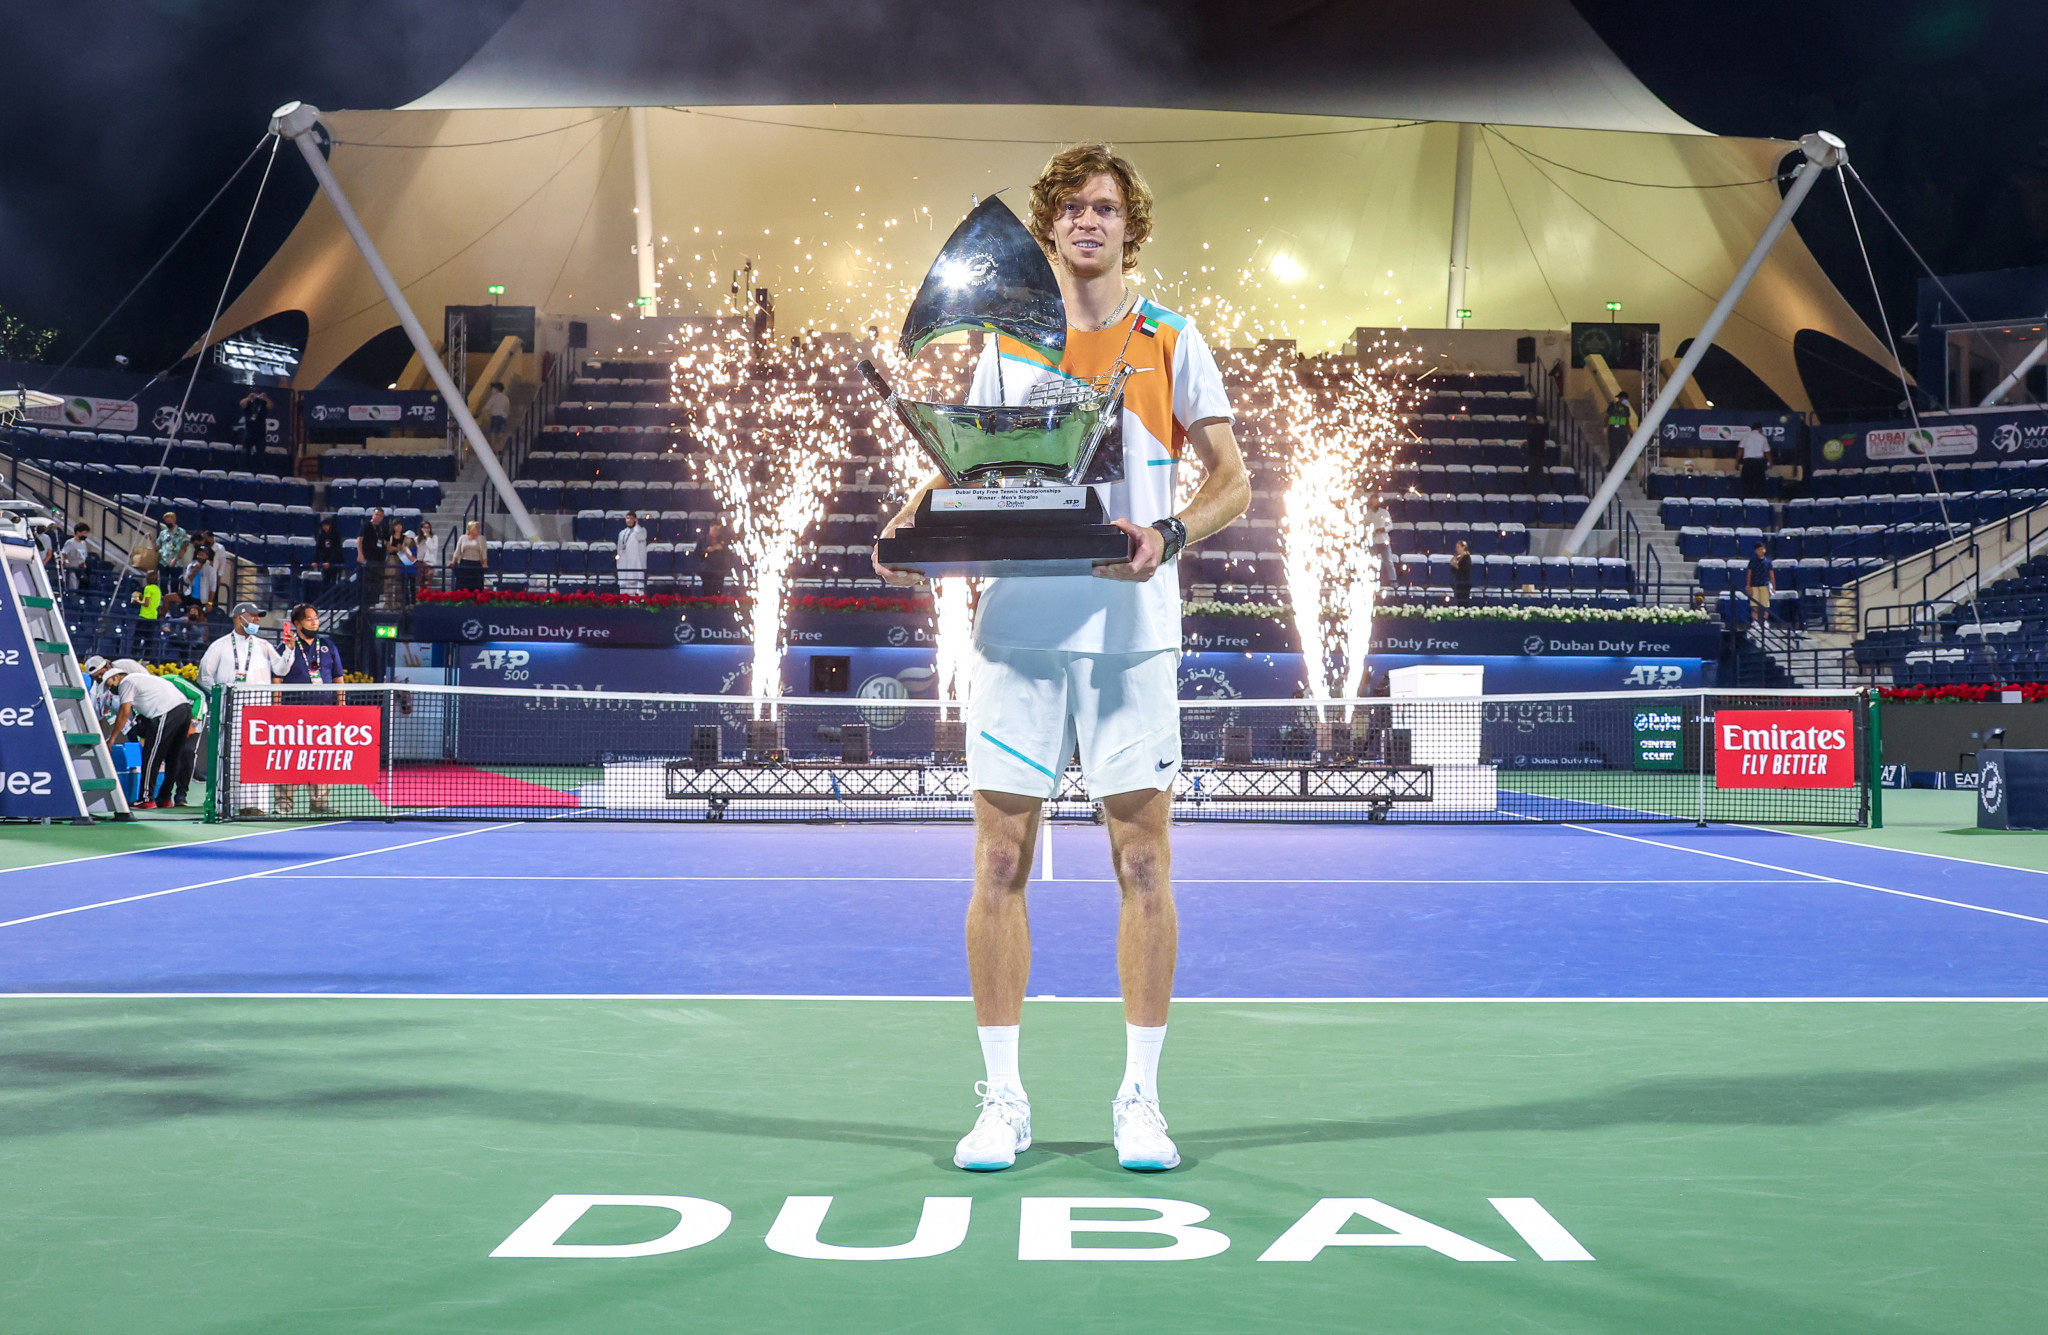 Russian player Andrey Rublev won the Dubai Tennis Championships as a neutral last year, and created headlines with his plea for 